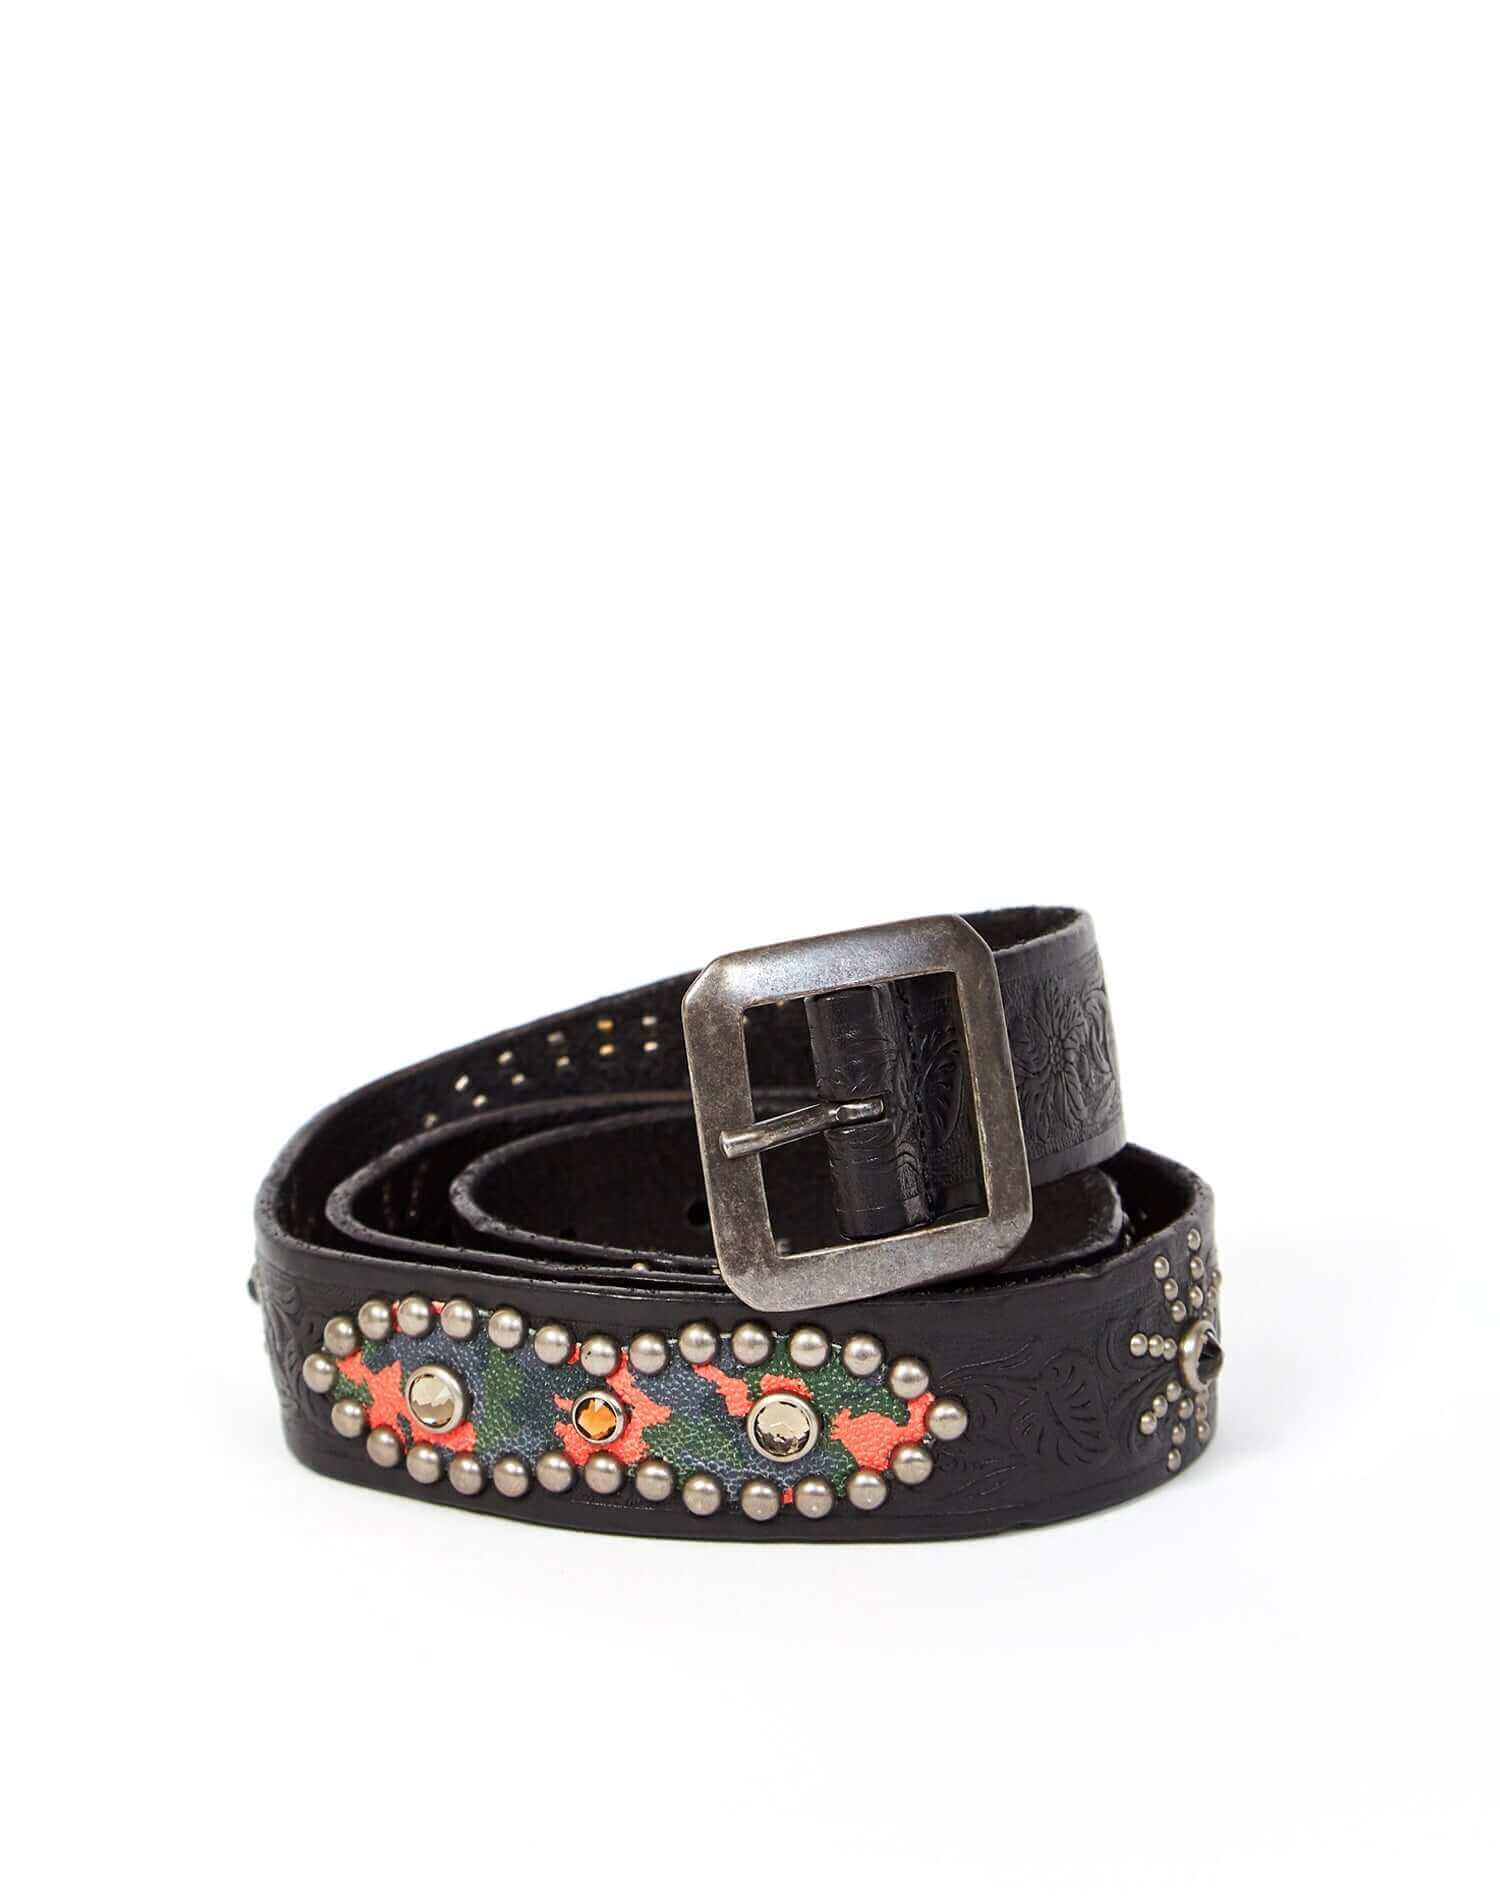 ARMY BELT Black leather belt with carved details. Studded inserts with camo print and rhinestones. Squared zamac buckle. Height: 3,5 cm. Made in Italy. HTC LOS ANGELES